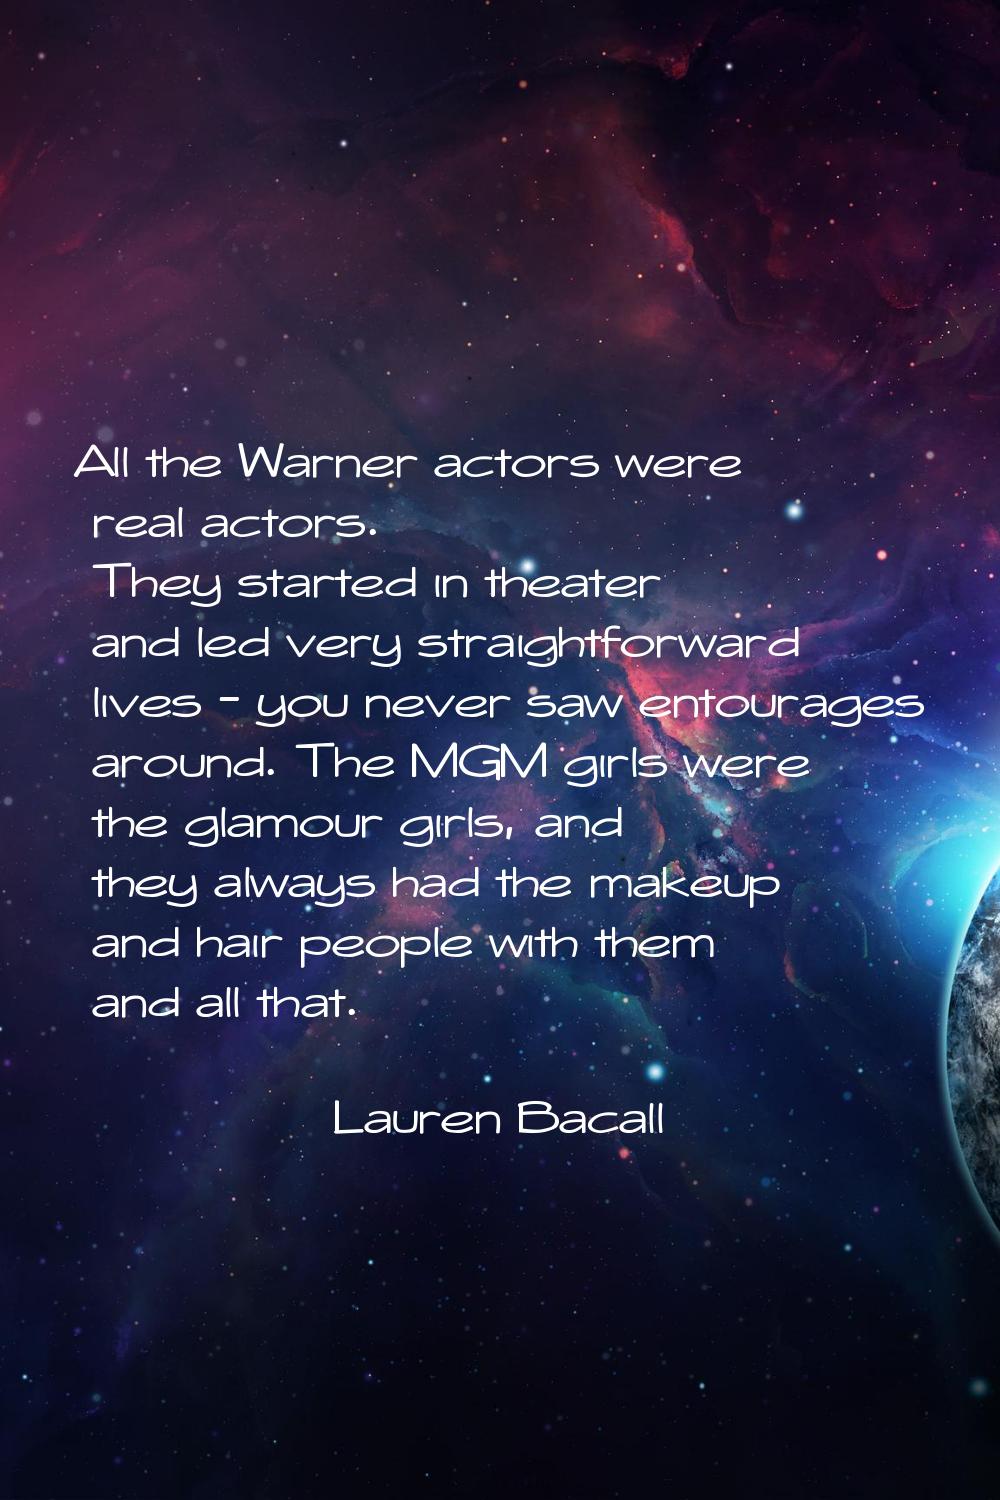 All the Warner actors were real actors. They started in theater and led very straightforward lives 